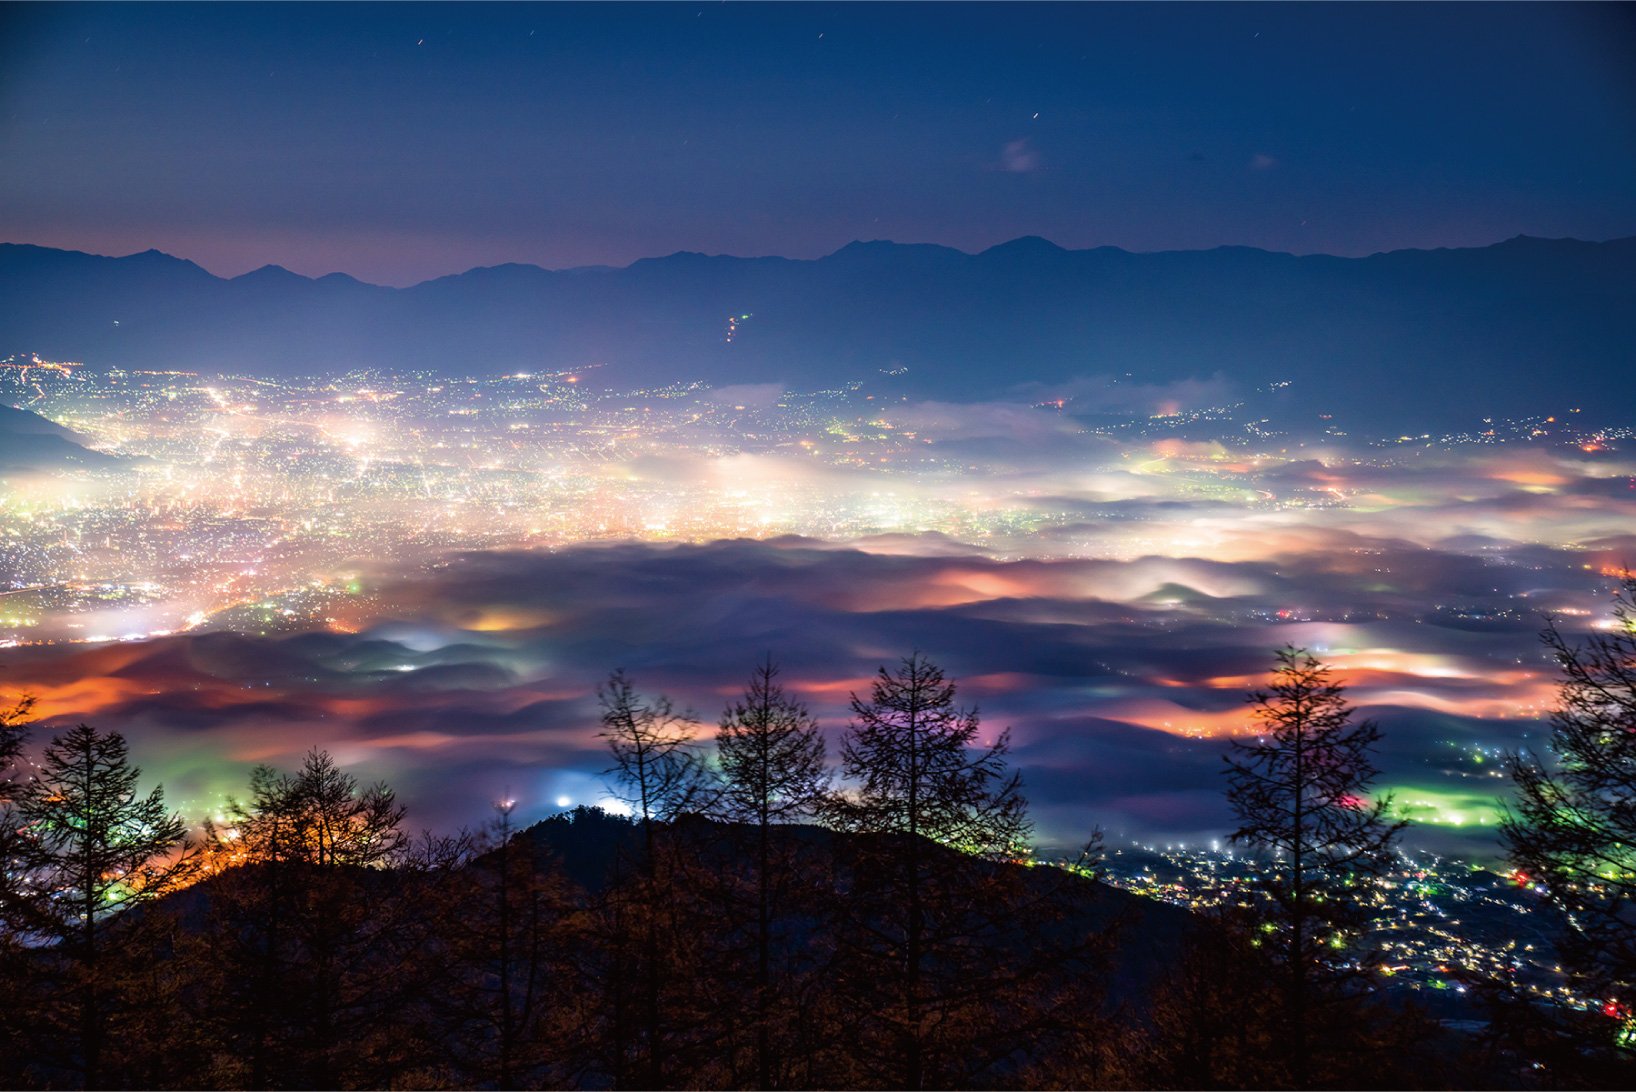 Take in an enchanting night view featured as one of the 100 landscapes of Japan